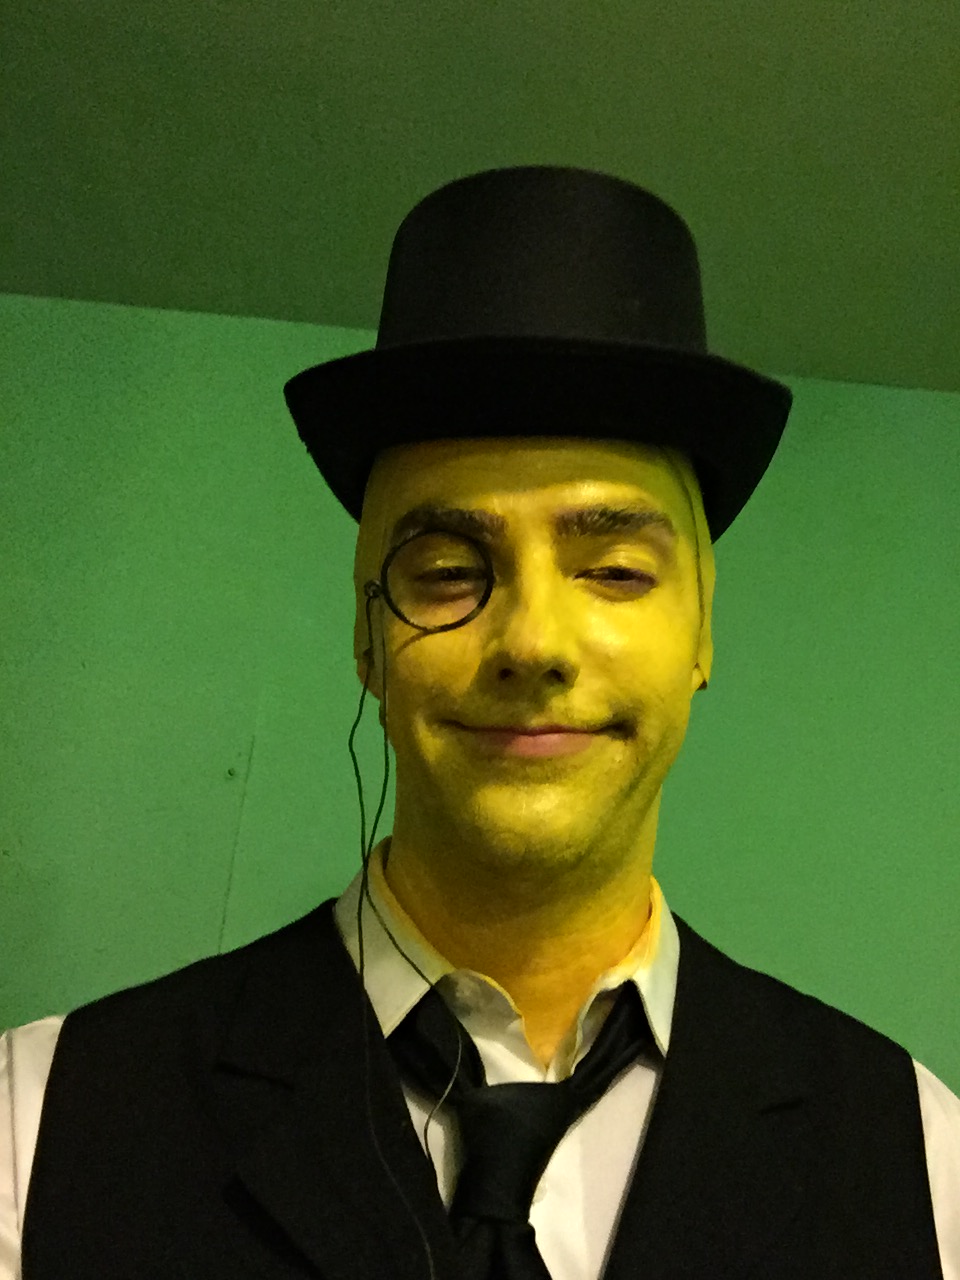 Drunk Mr. Peanut from OSFUG Character Show